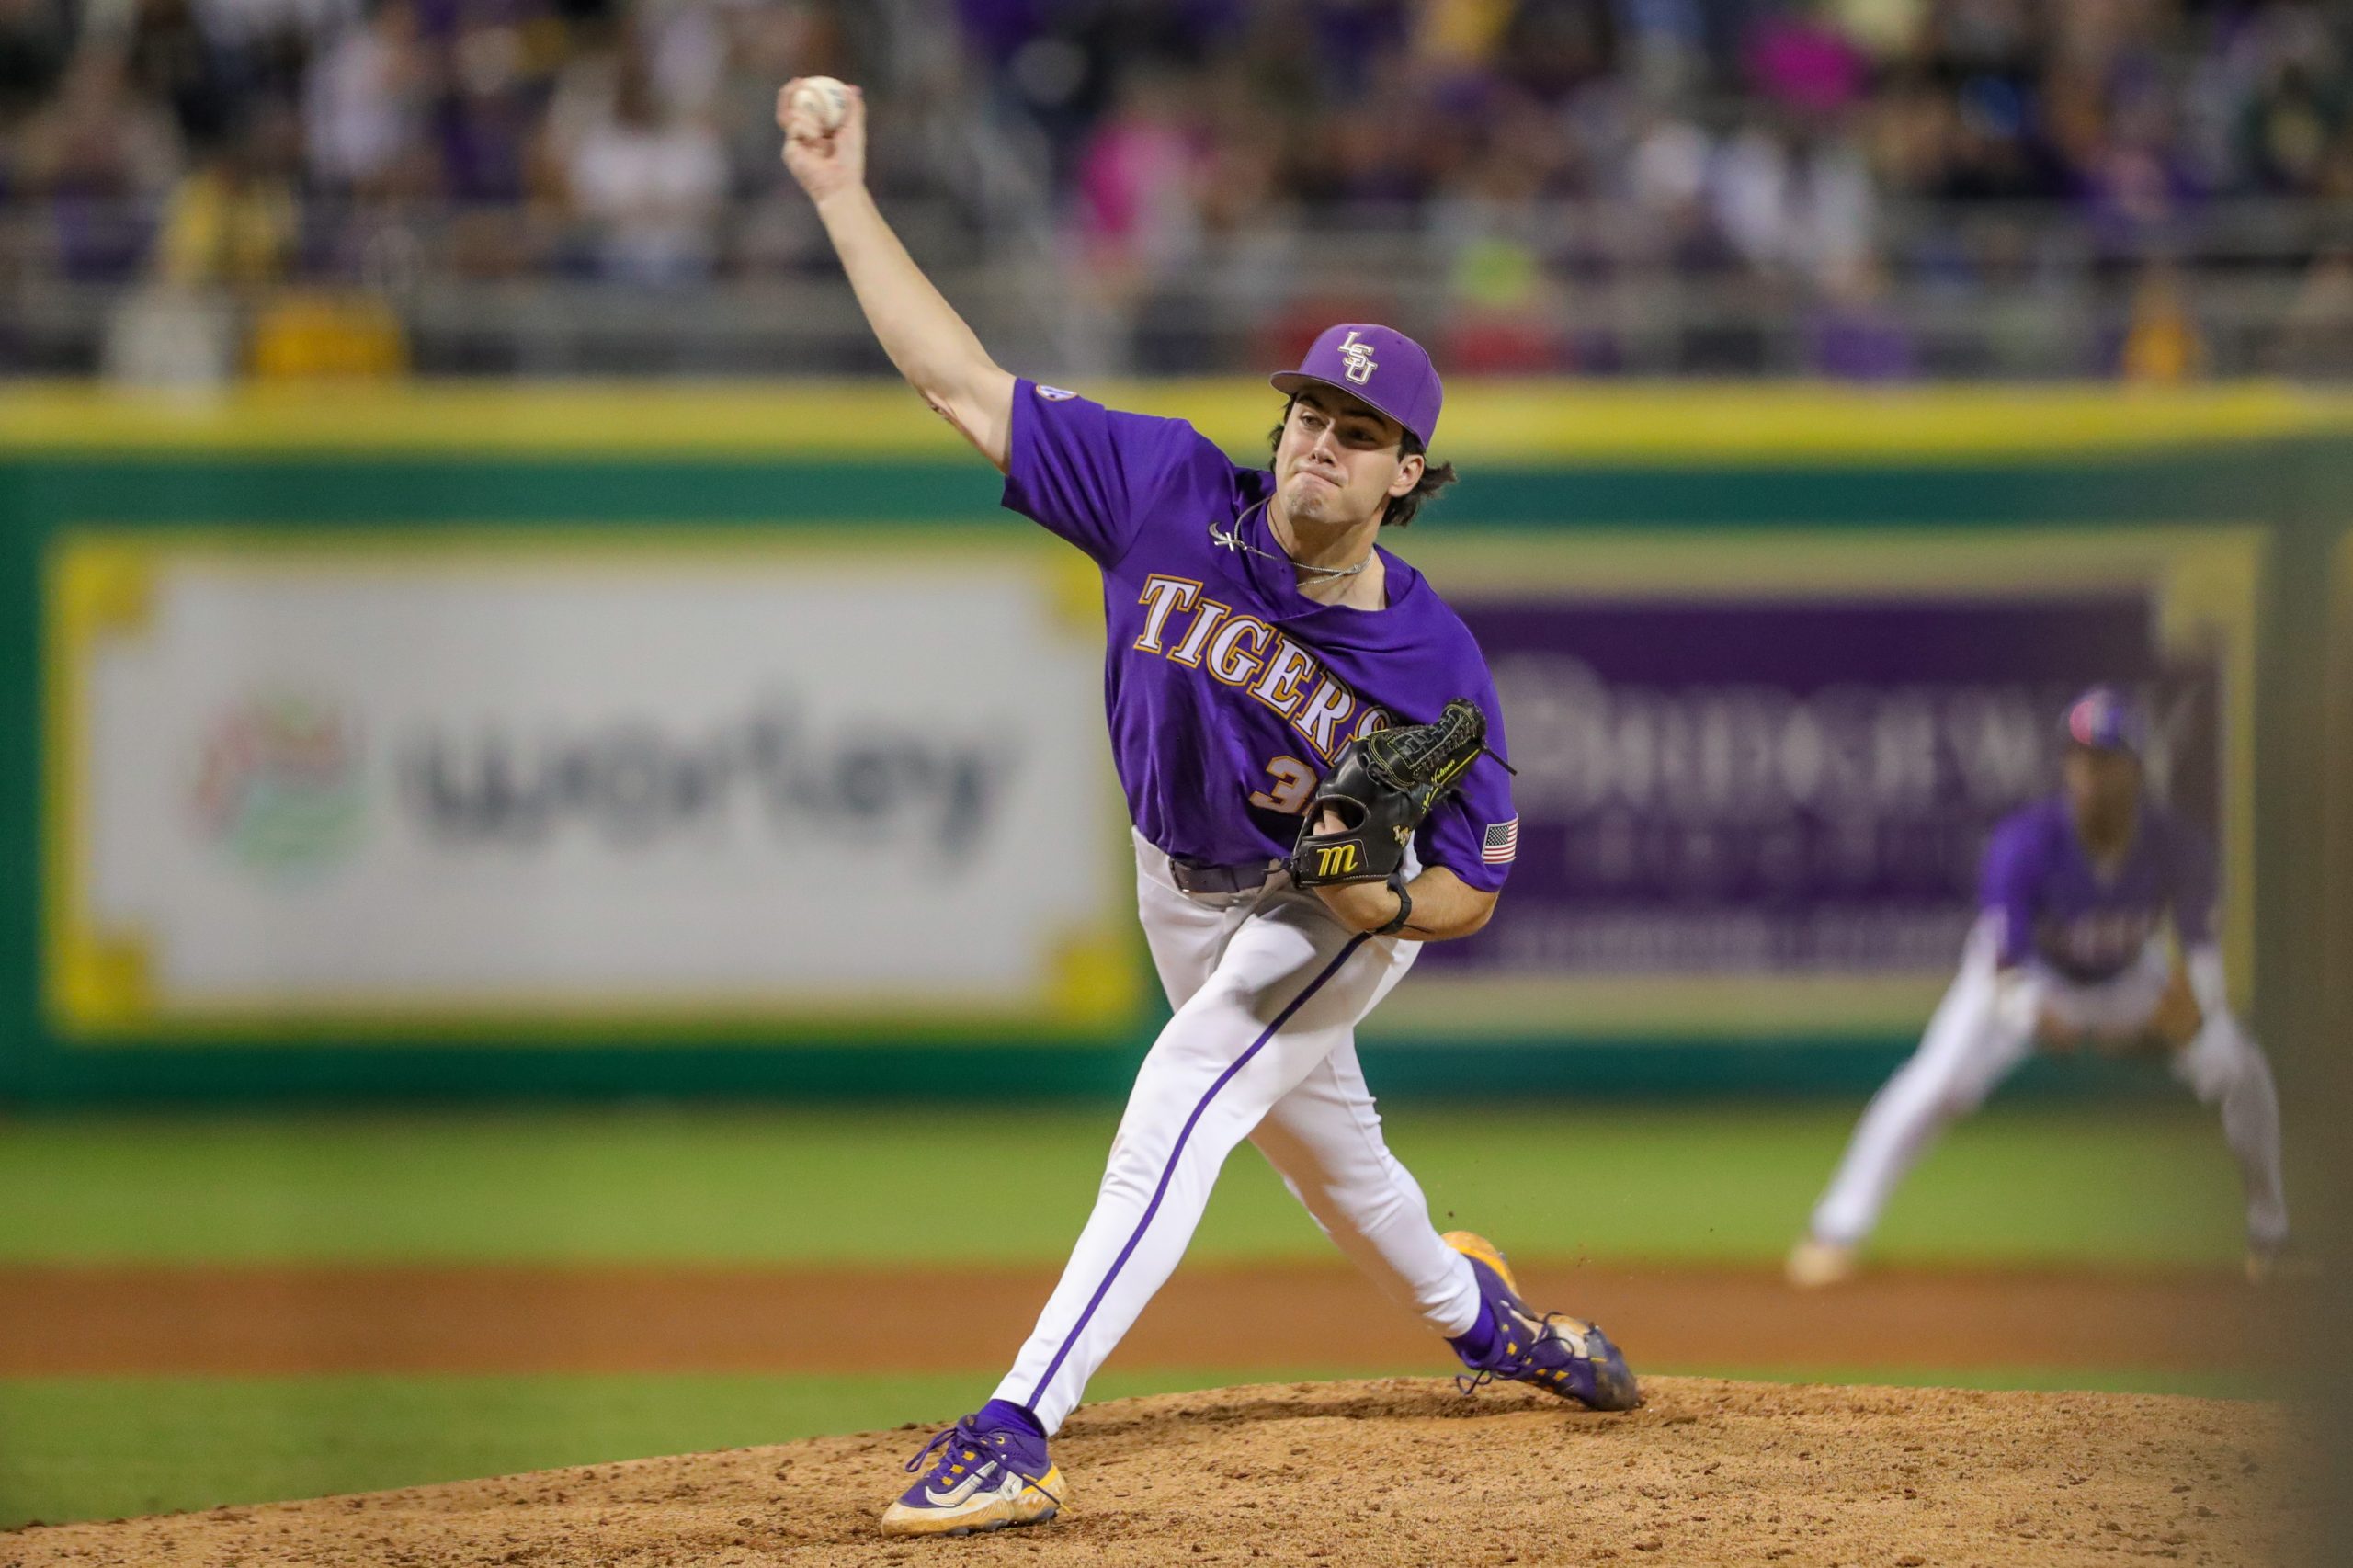 Series preview: LSU baseball makes pitching changes for series against No. 1 Arkansas